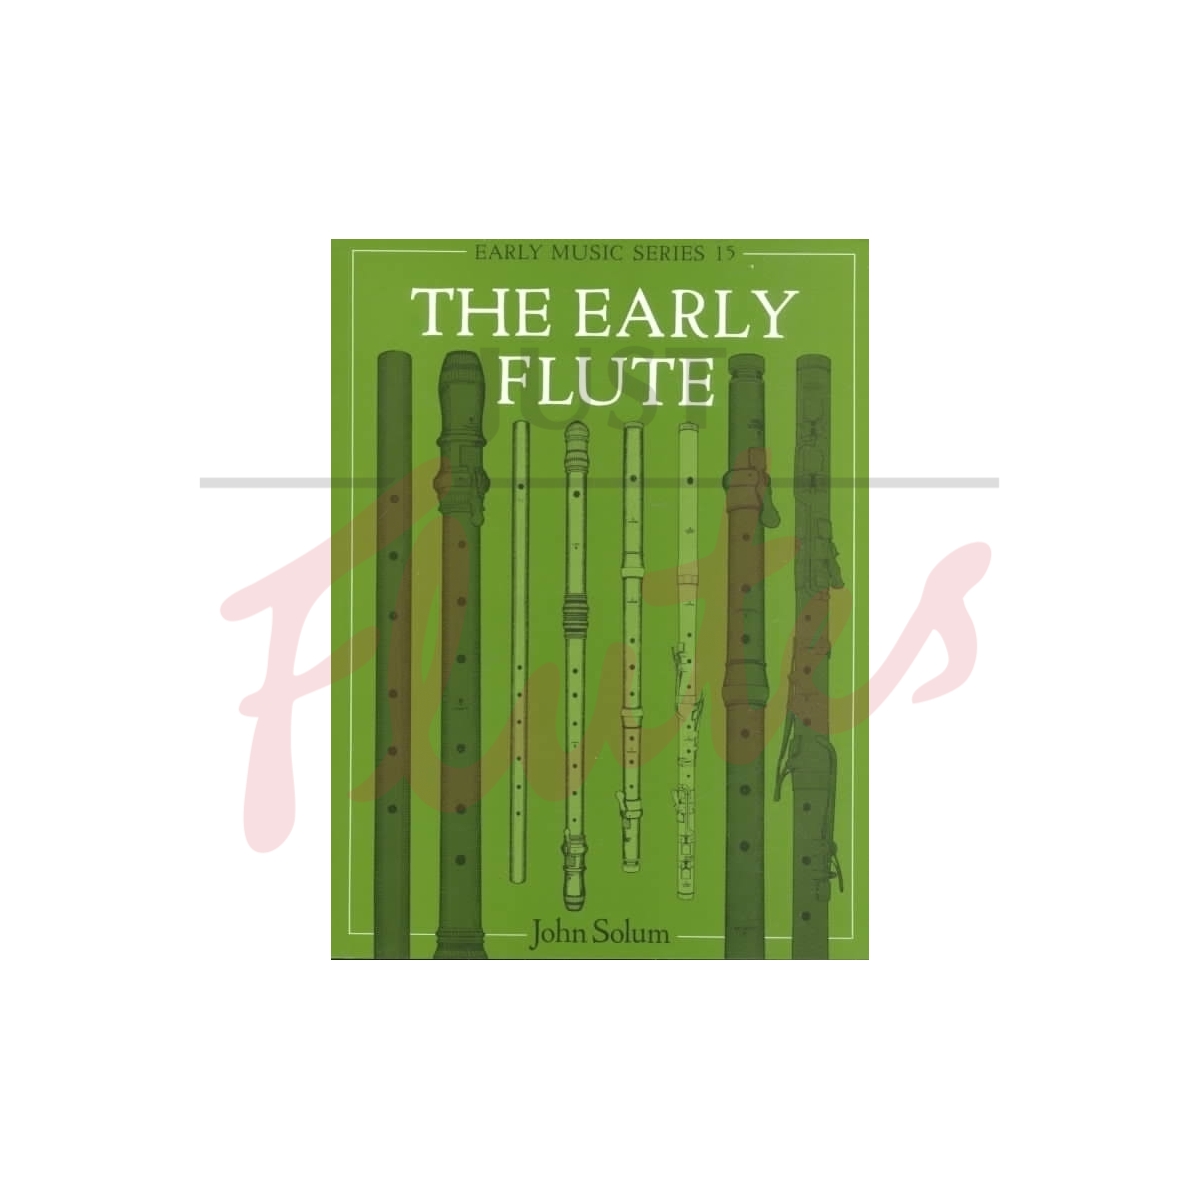 The Early Flute